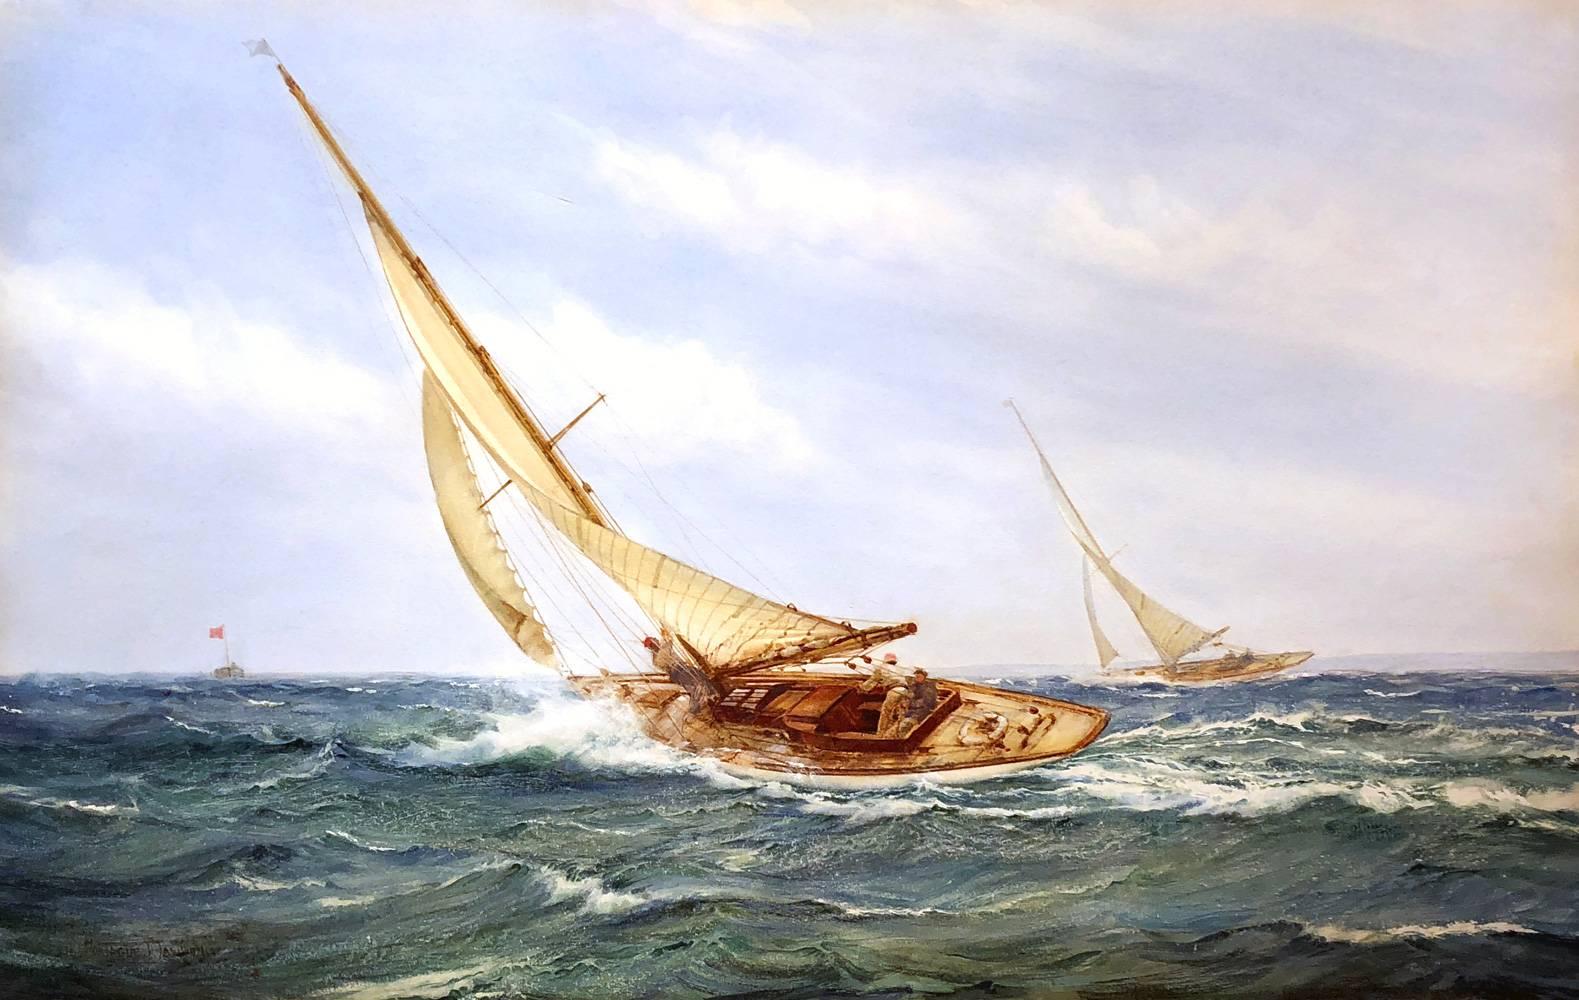 MONTAGUE DAWSON
British, 1895–1973

A Close Race

Signed MONTAGUE DAWSON
Watercolor on paper
17 x 26¾ inches (43.2 x 68 cm)
Framed: 21½ x 32 inches (54.5 x 81.2 cm)

Provenance
Frost & Reed Ltd., London
Private Collection, Michigan